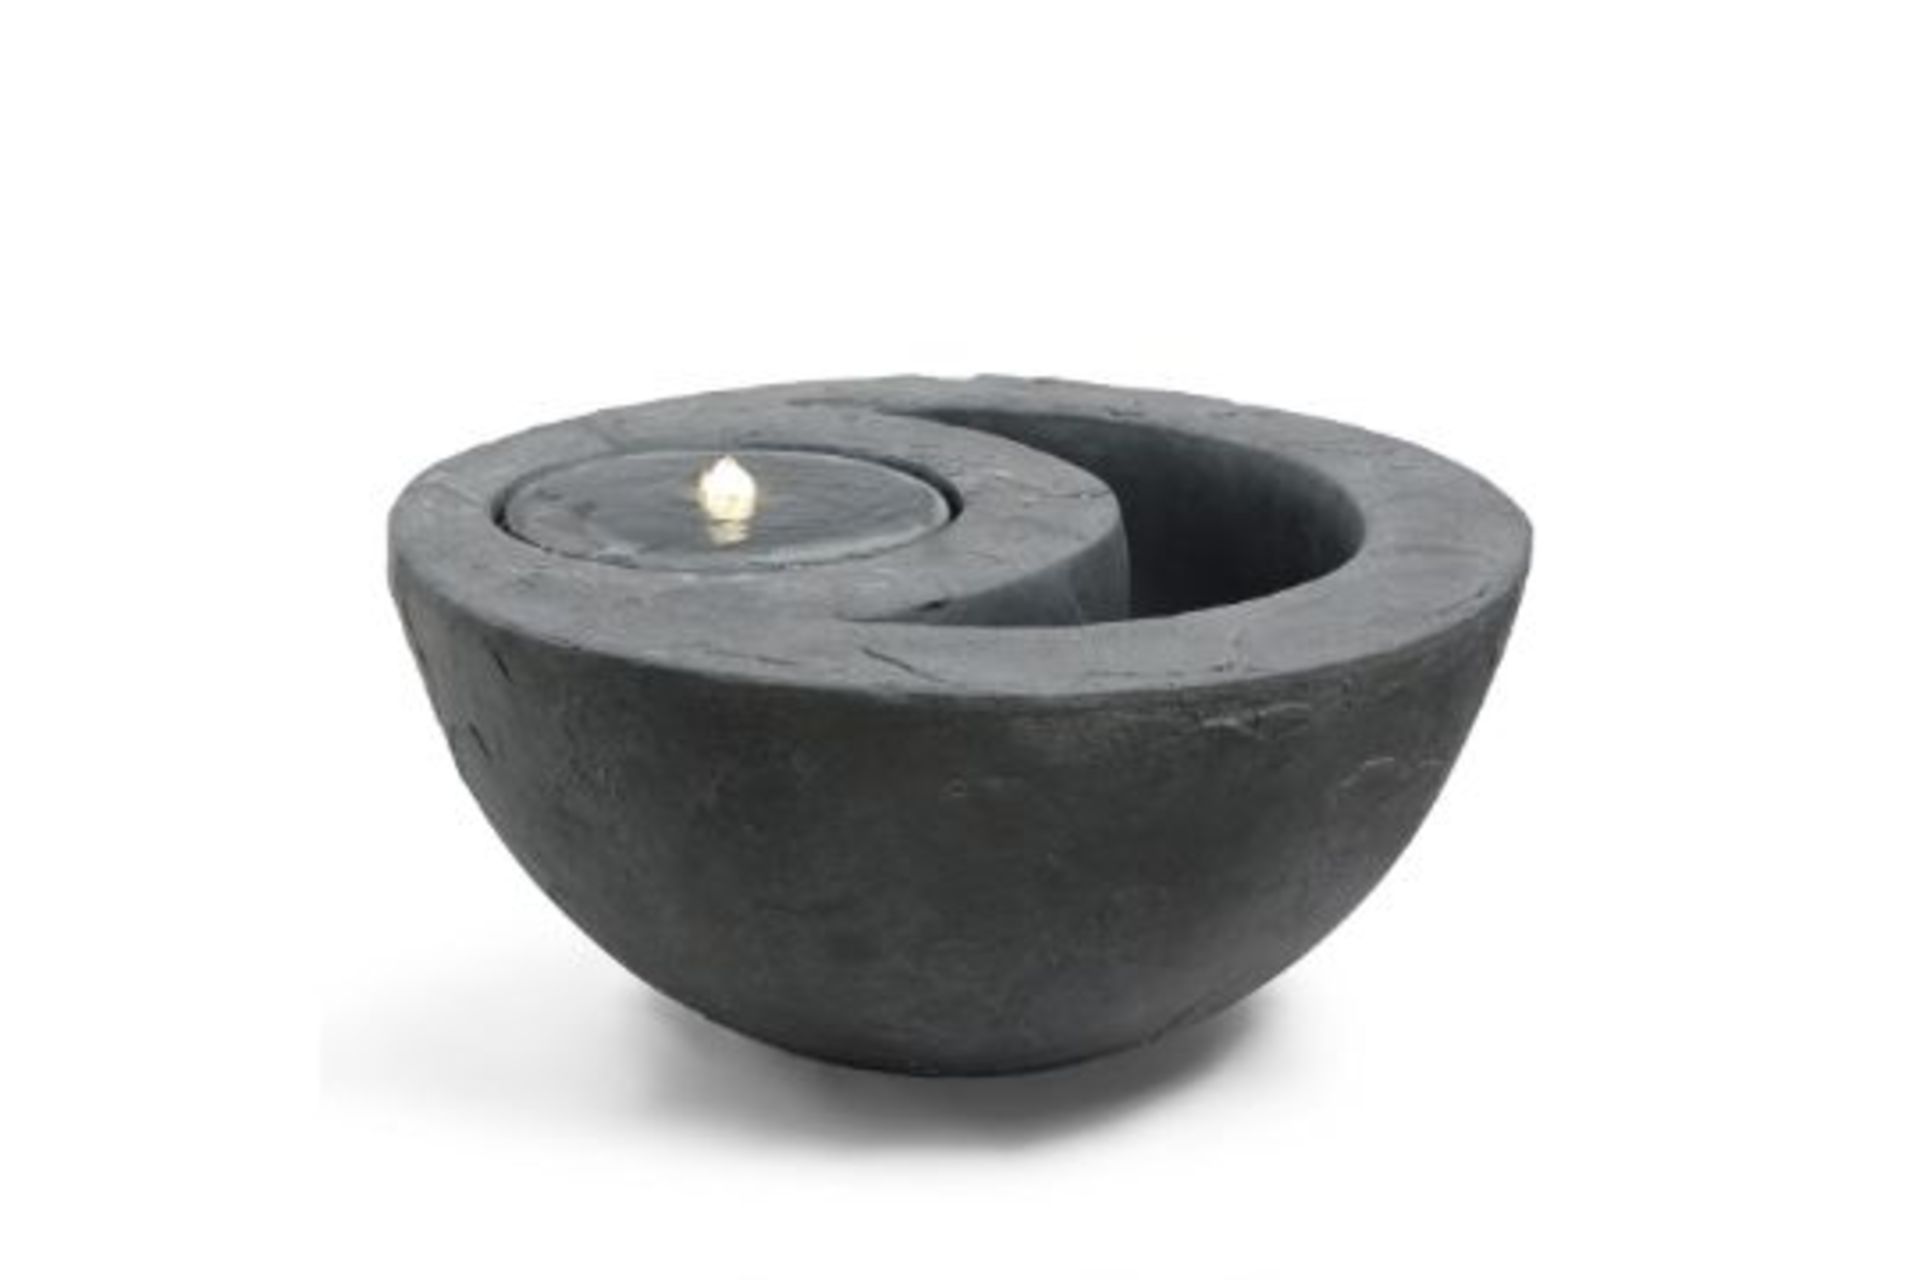 New & Boxed Dual Water Feature and Planter. RRP £299.99 (REF726) - Garden Bowl Design Planter, - Image 2 of 6